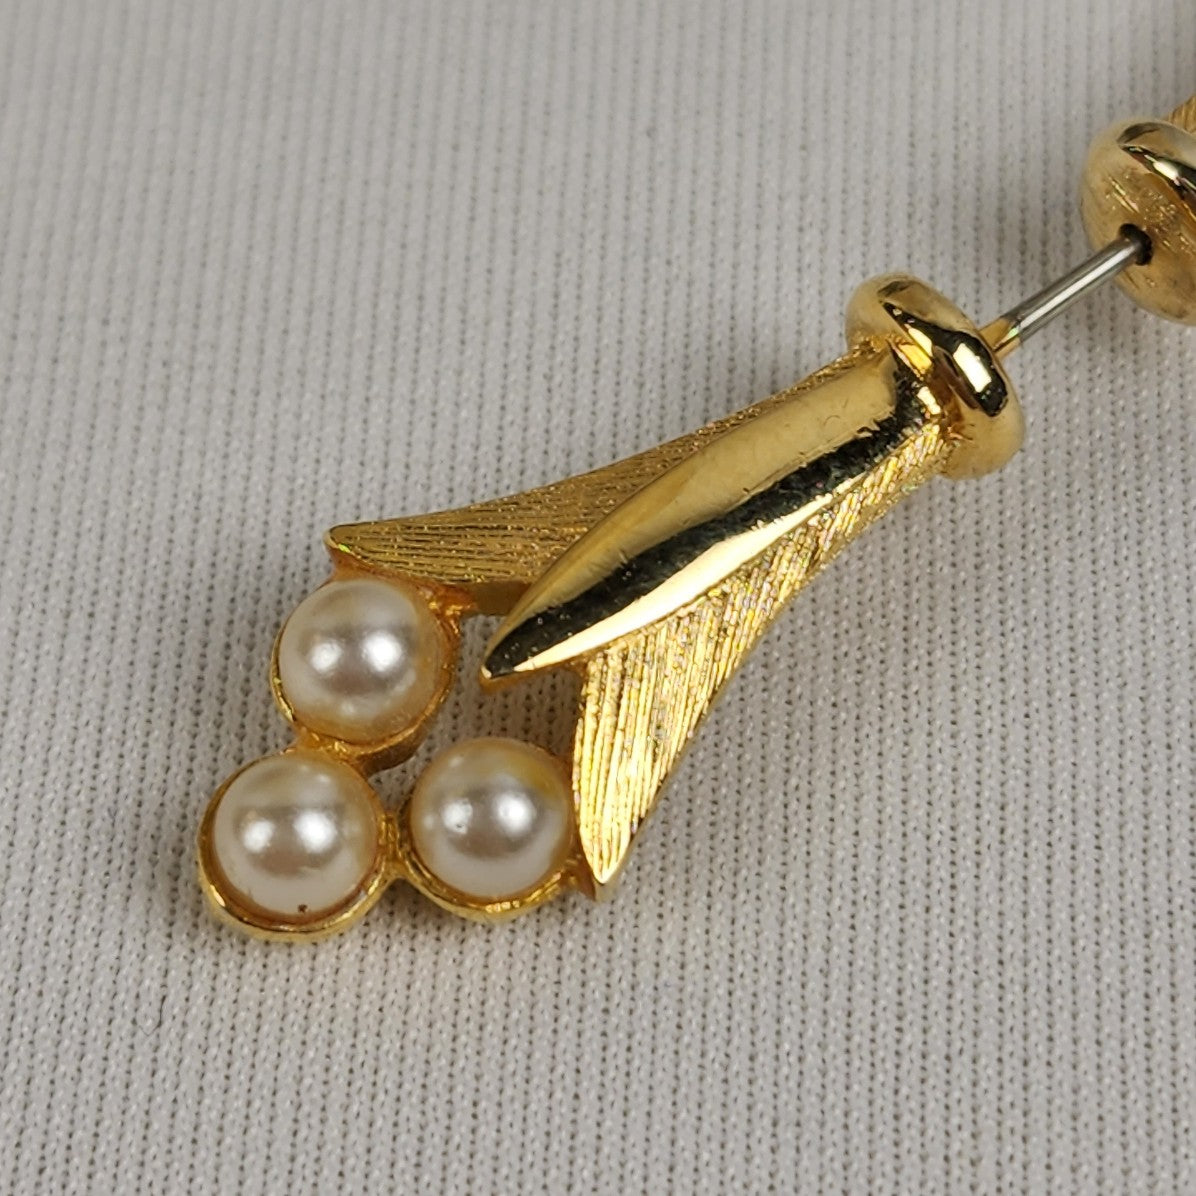 Vintage Faux Pearl Sweater Brooch Gold Tone Etched